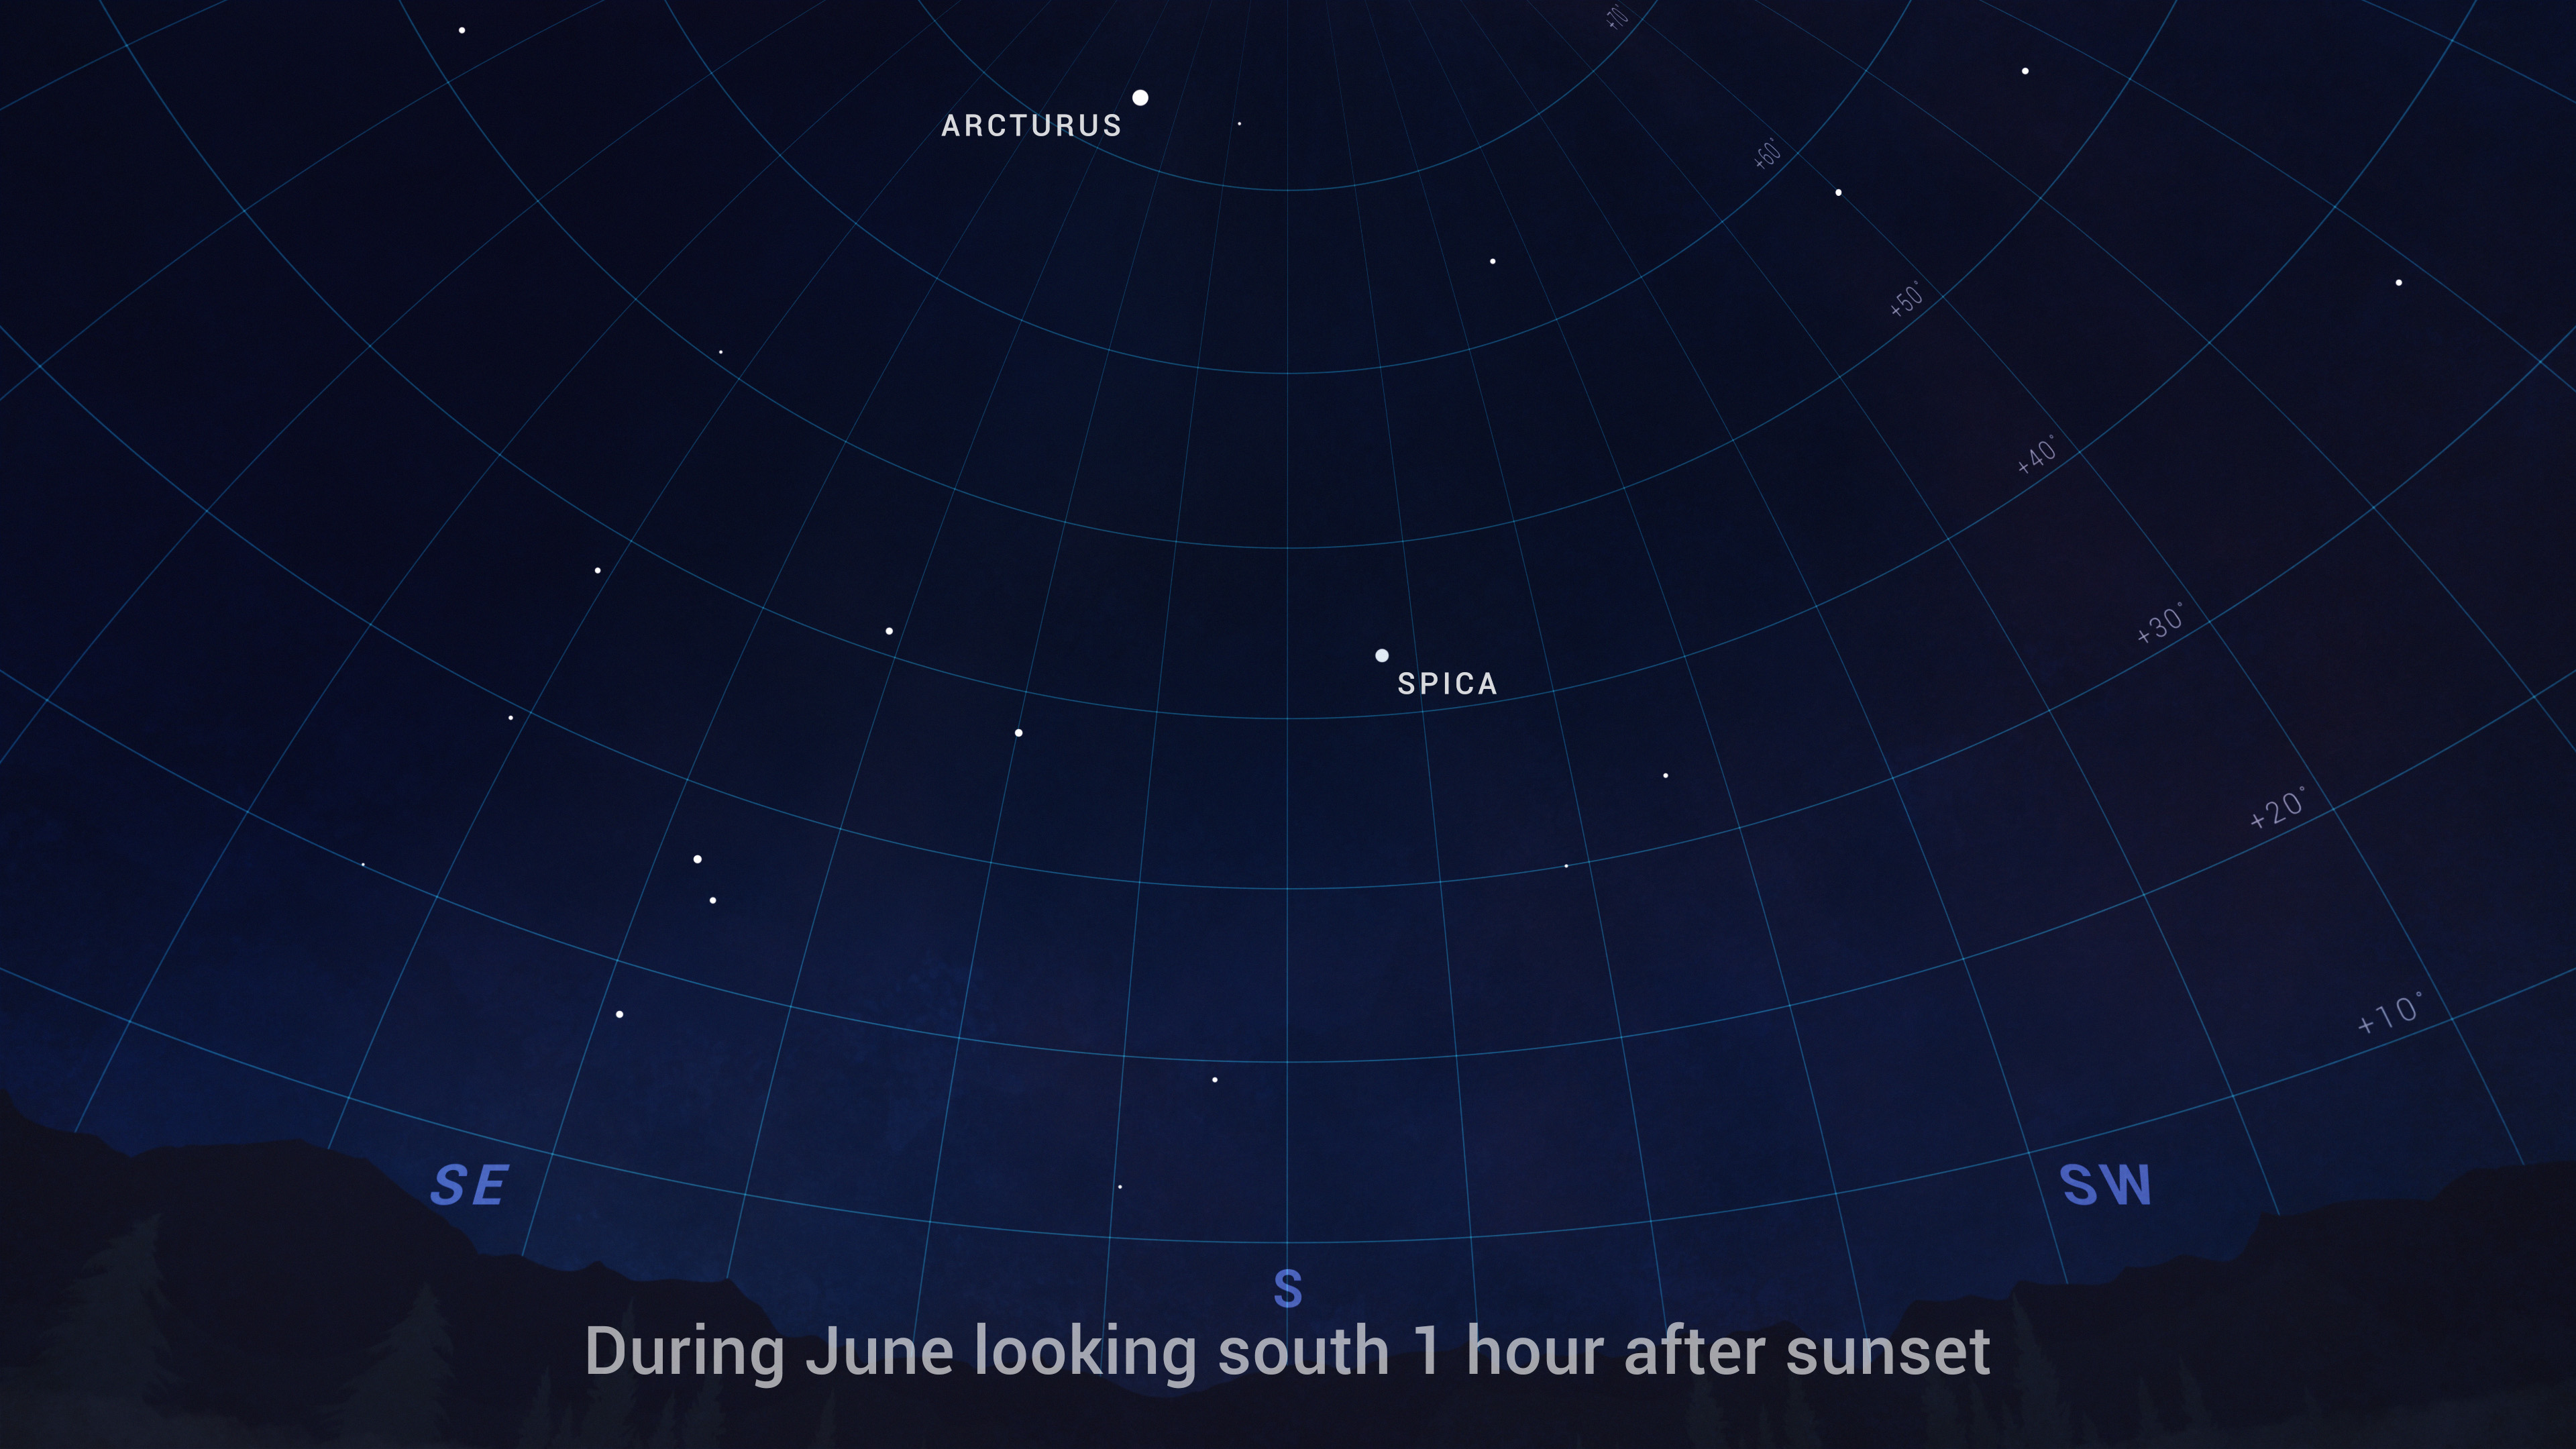 An illustrated sky chart shows the evening sky one hour before sunrise on June 14. Jupiter is shown as a bright dot below center, with the crescent Moon just to its left. Saturn is a smaller, fainter dot near upper right, being higher in the sky.